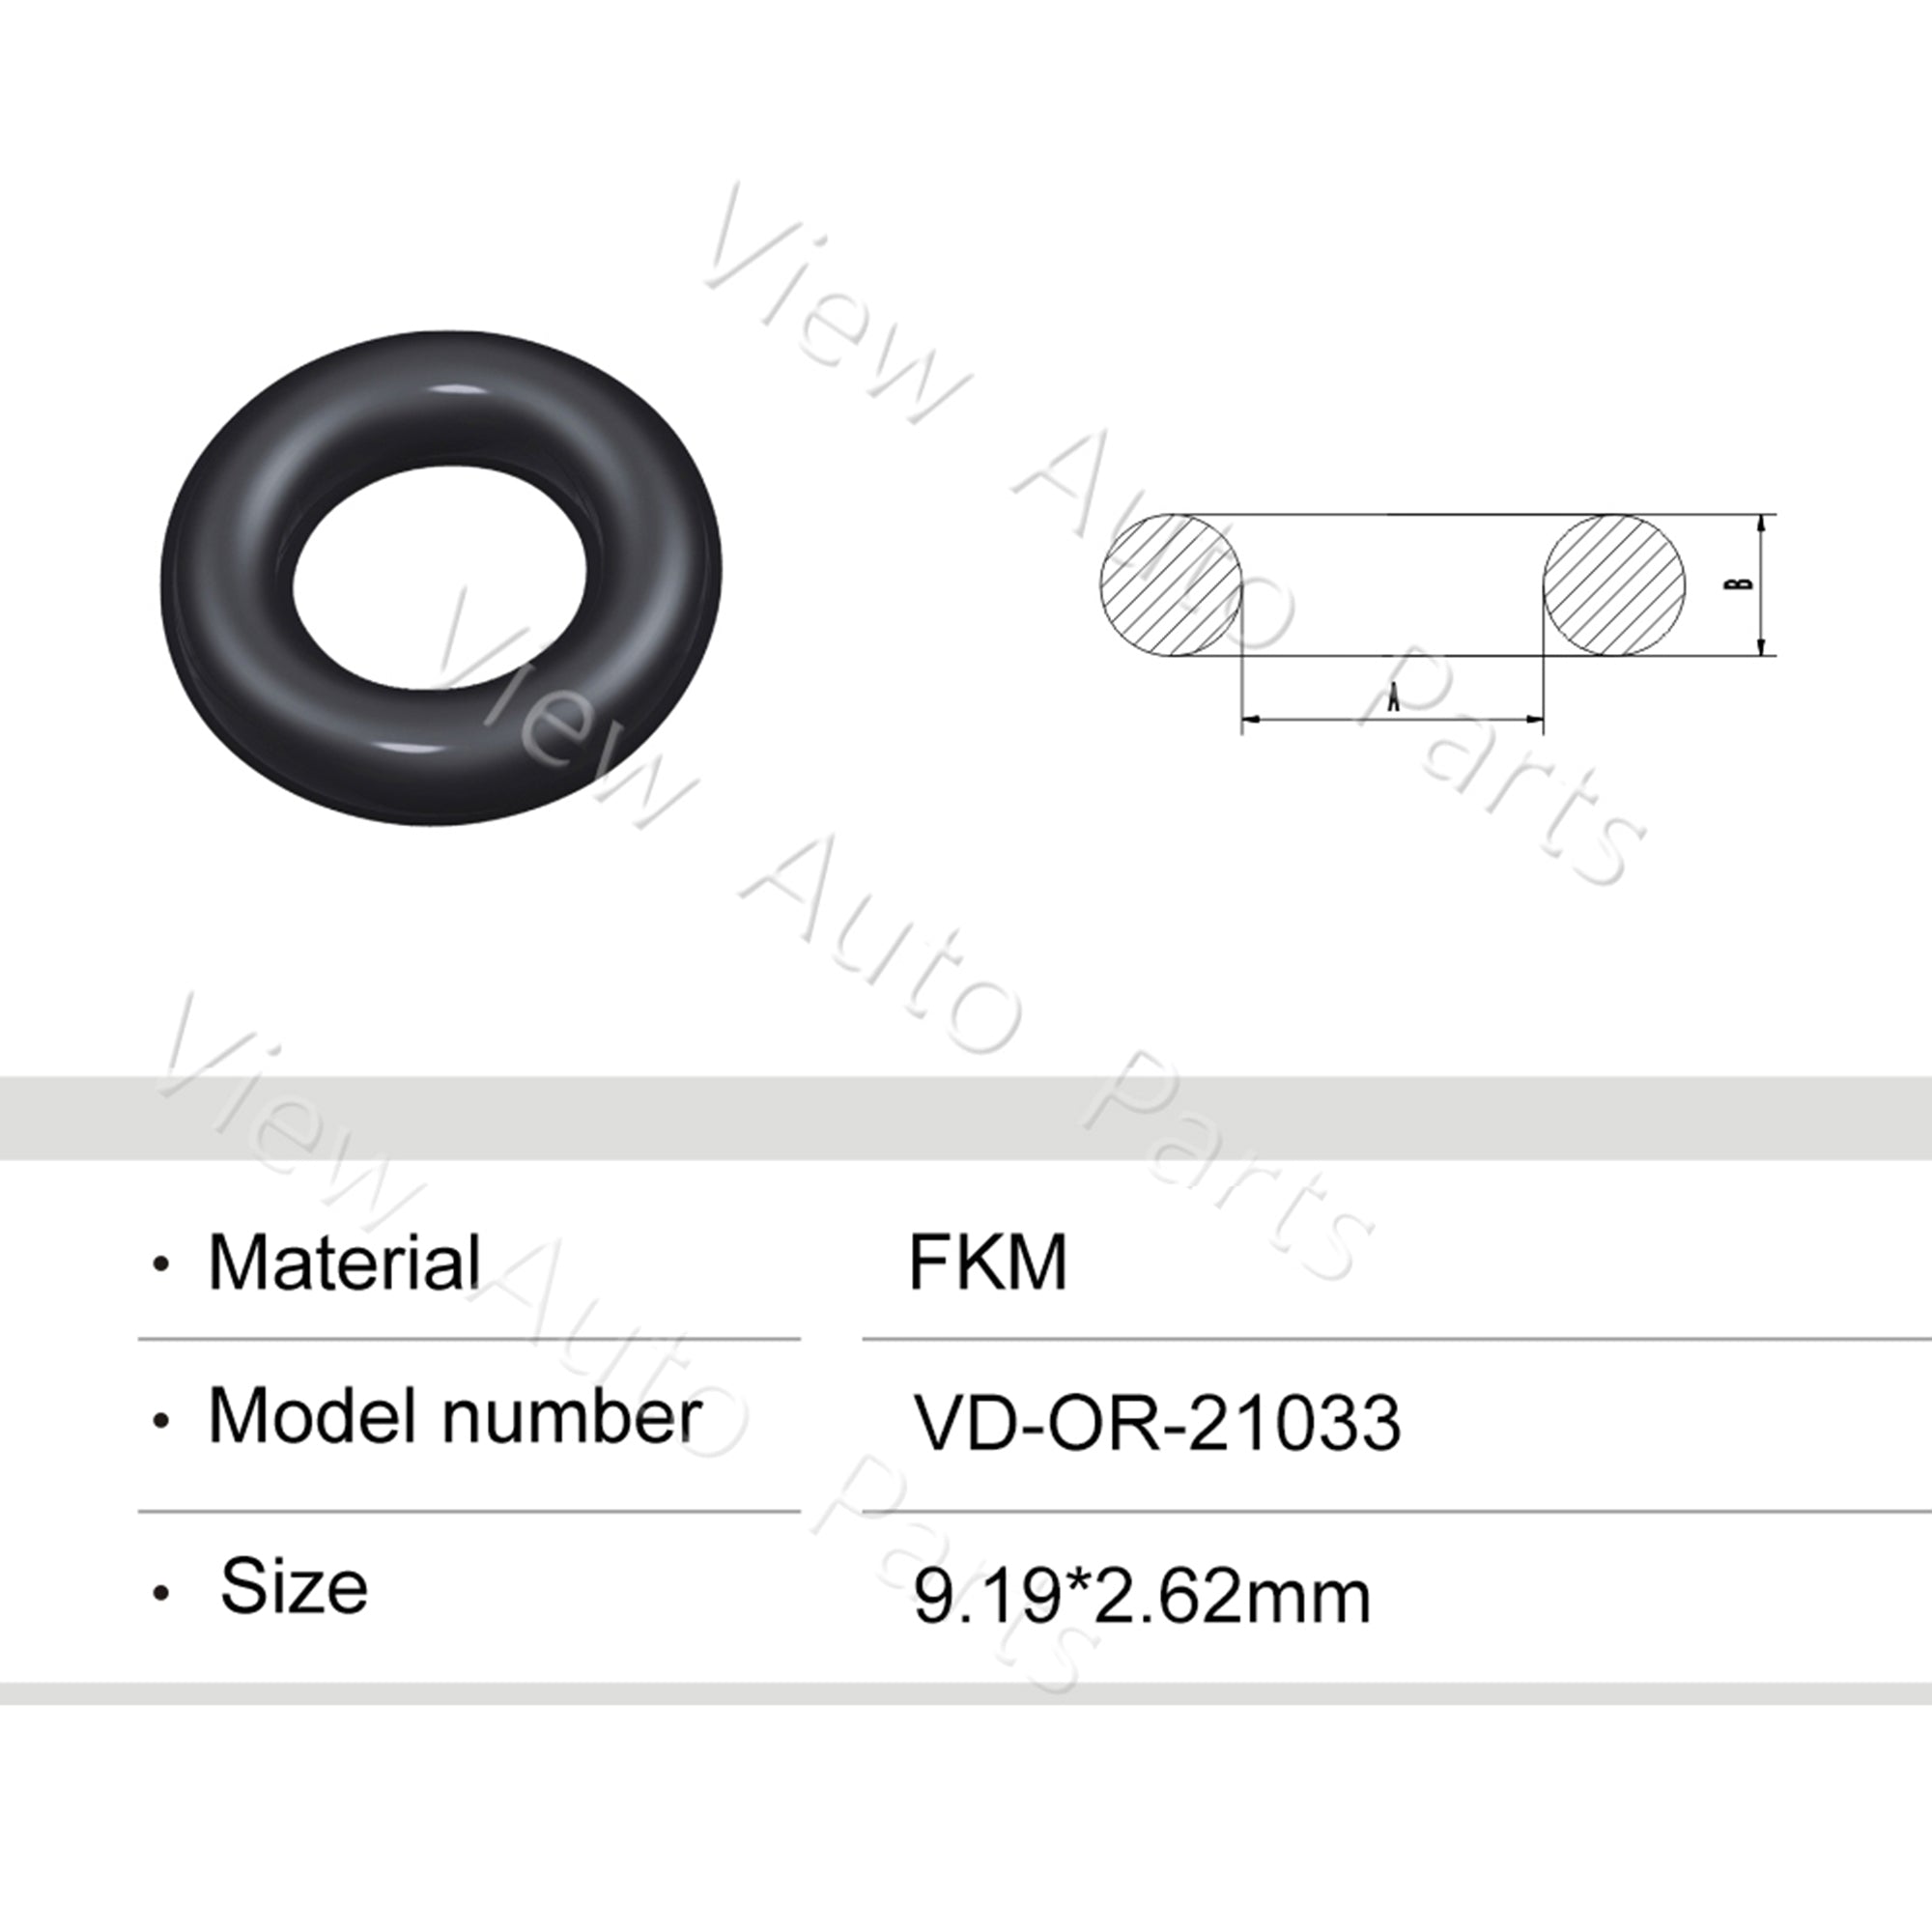 Fuel Injector Rubber Seal Orings for Chevrolet GMC Buick Fuel Injector Repair Kits FKM & Rubber Heat Resistant, Size: 9.19*2.62mm OR-21033